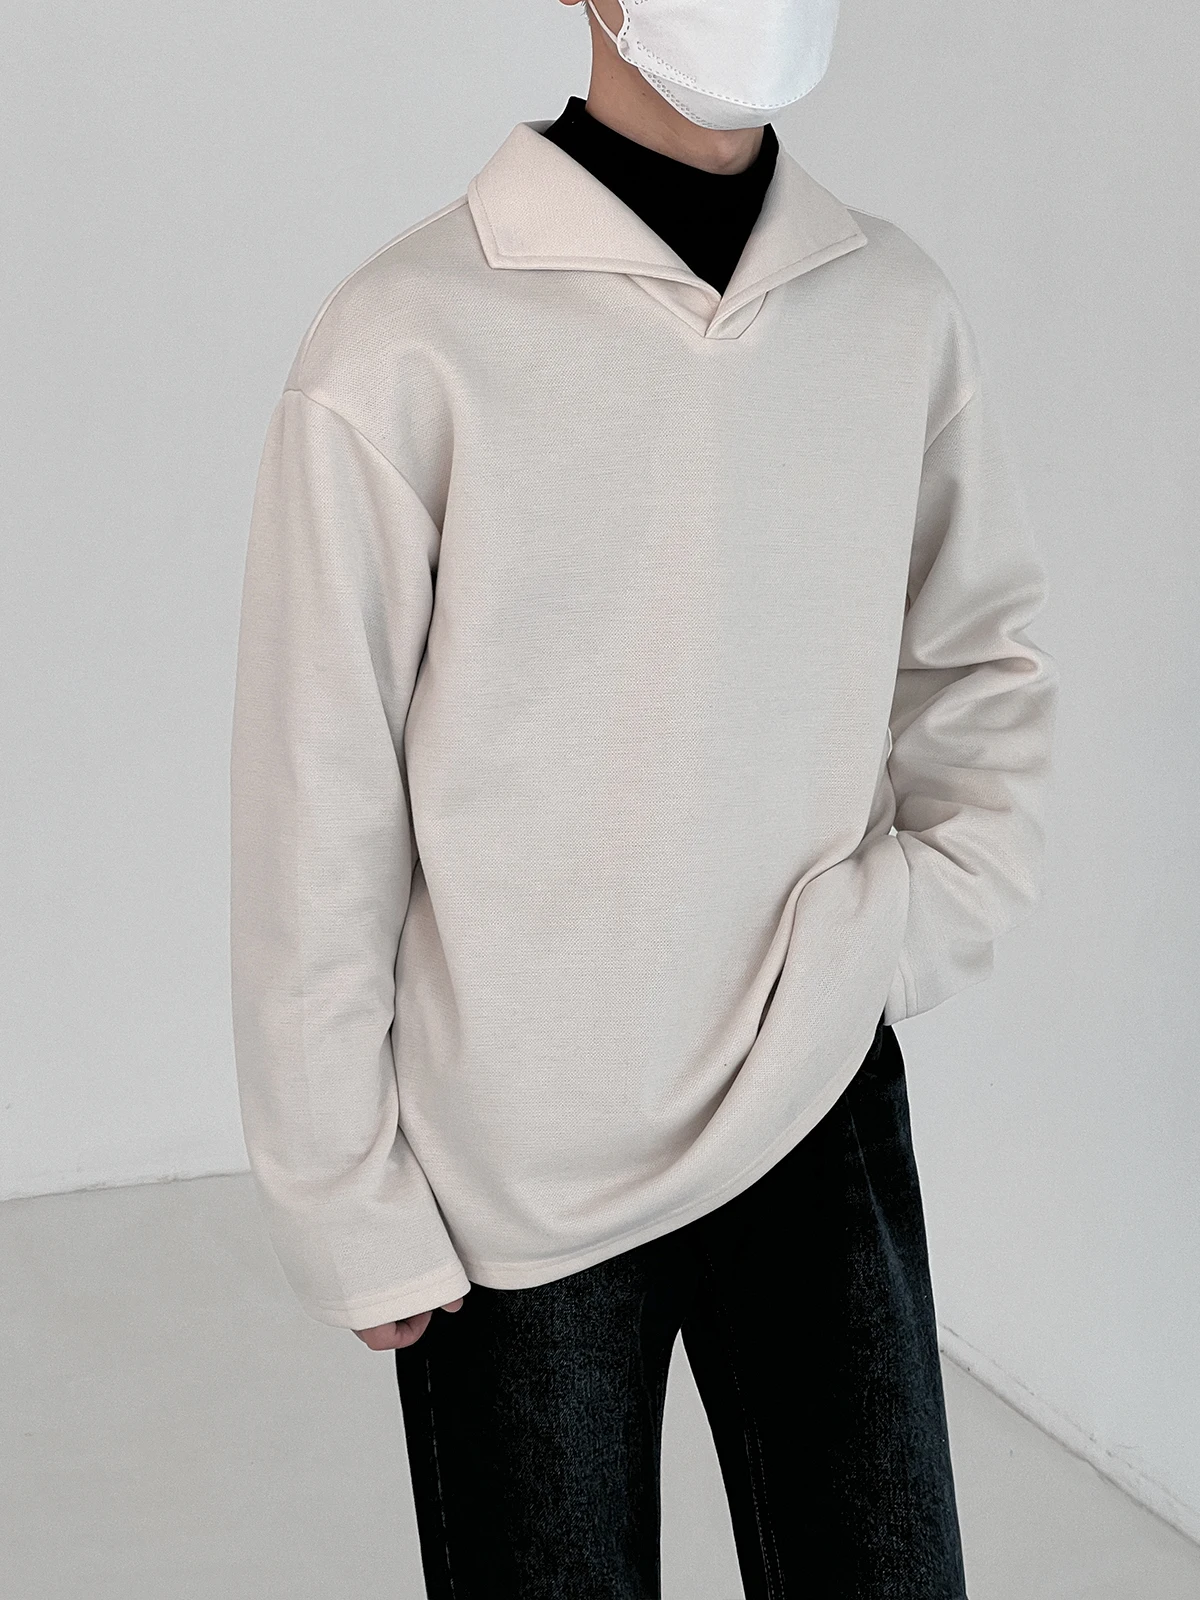 Spring and autumn thick polo shirt boys loose wild casual long-sleeved T-shirt trend lapel bottoming shirt